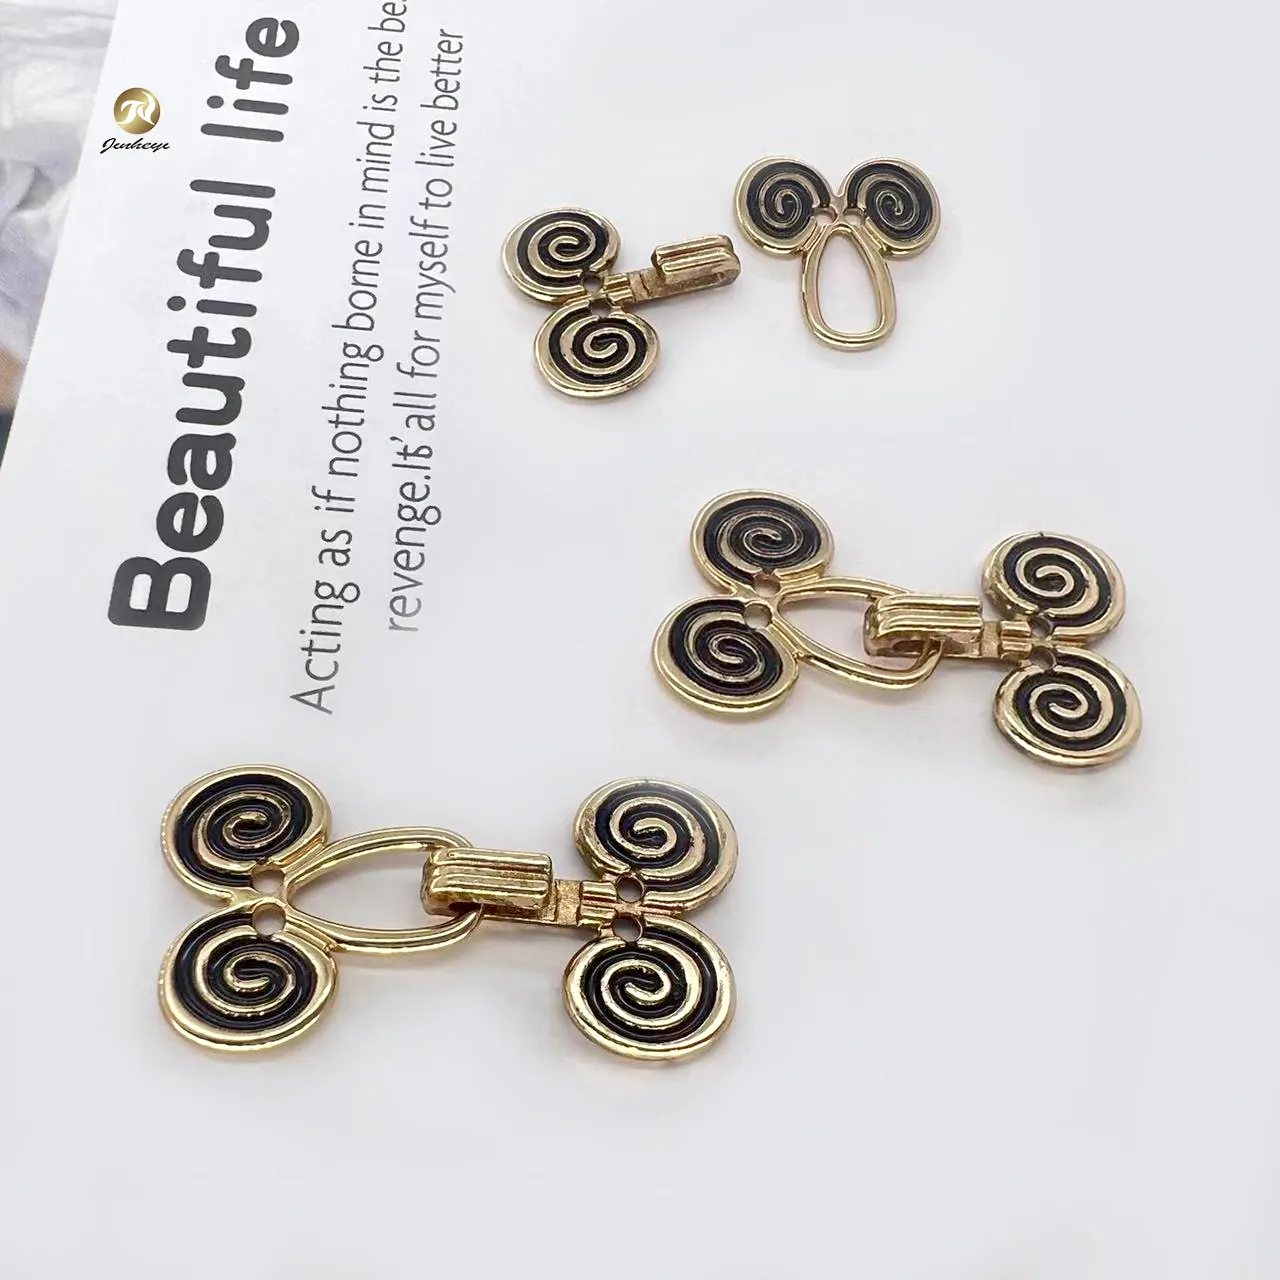 Classic Fashion Design High End Hooks Button Gold With Black Enamel Dress Hook For Clothing